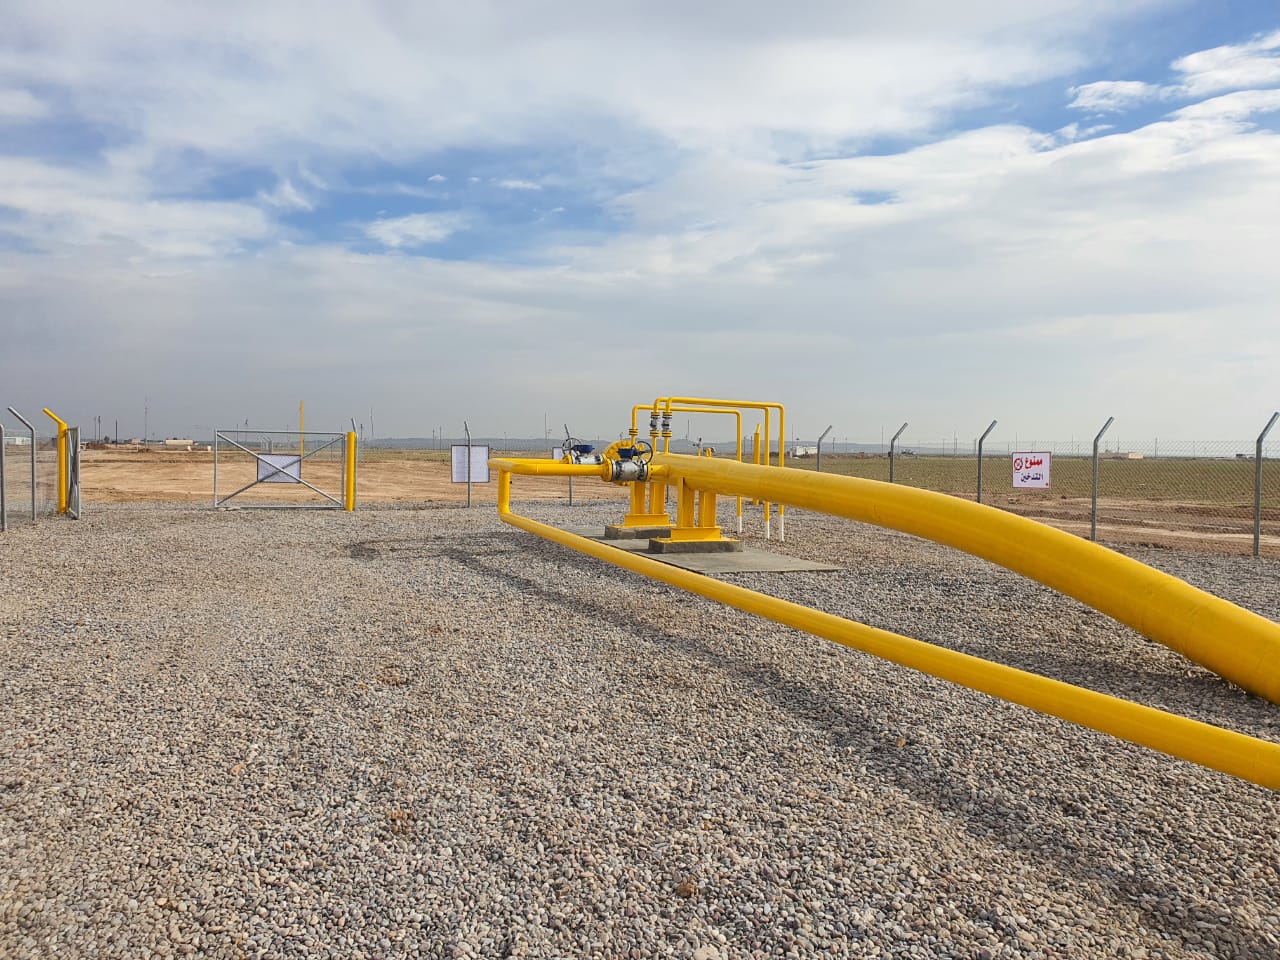 The Ministry of Oil completes a 22 km pipeline that supplies al-Qayyarah Power Plant